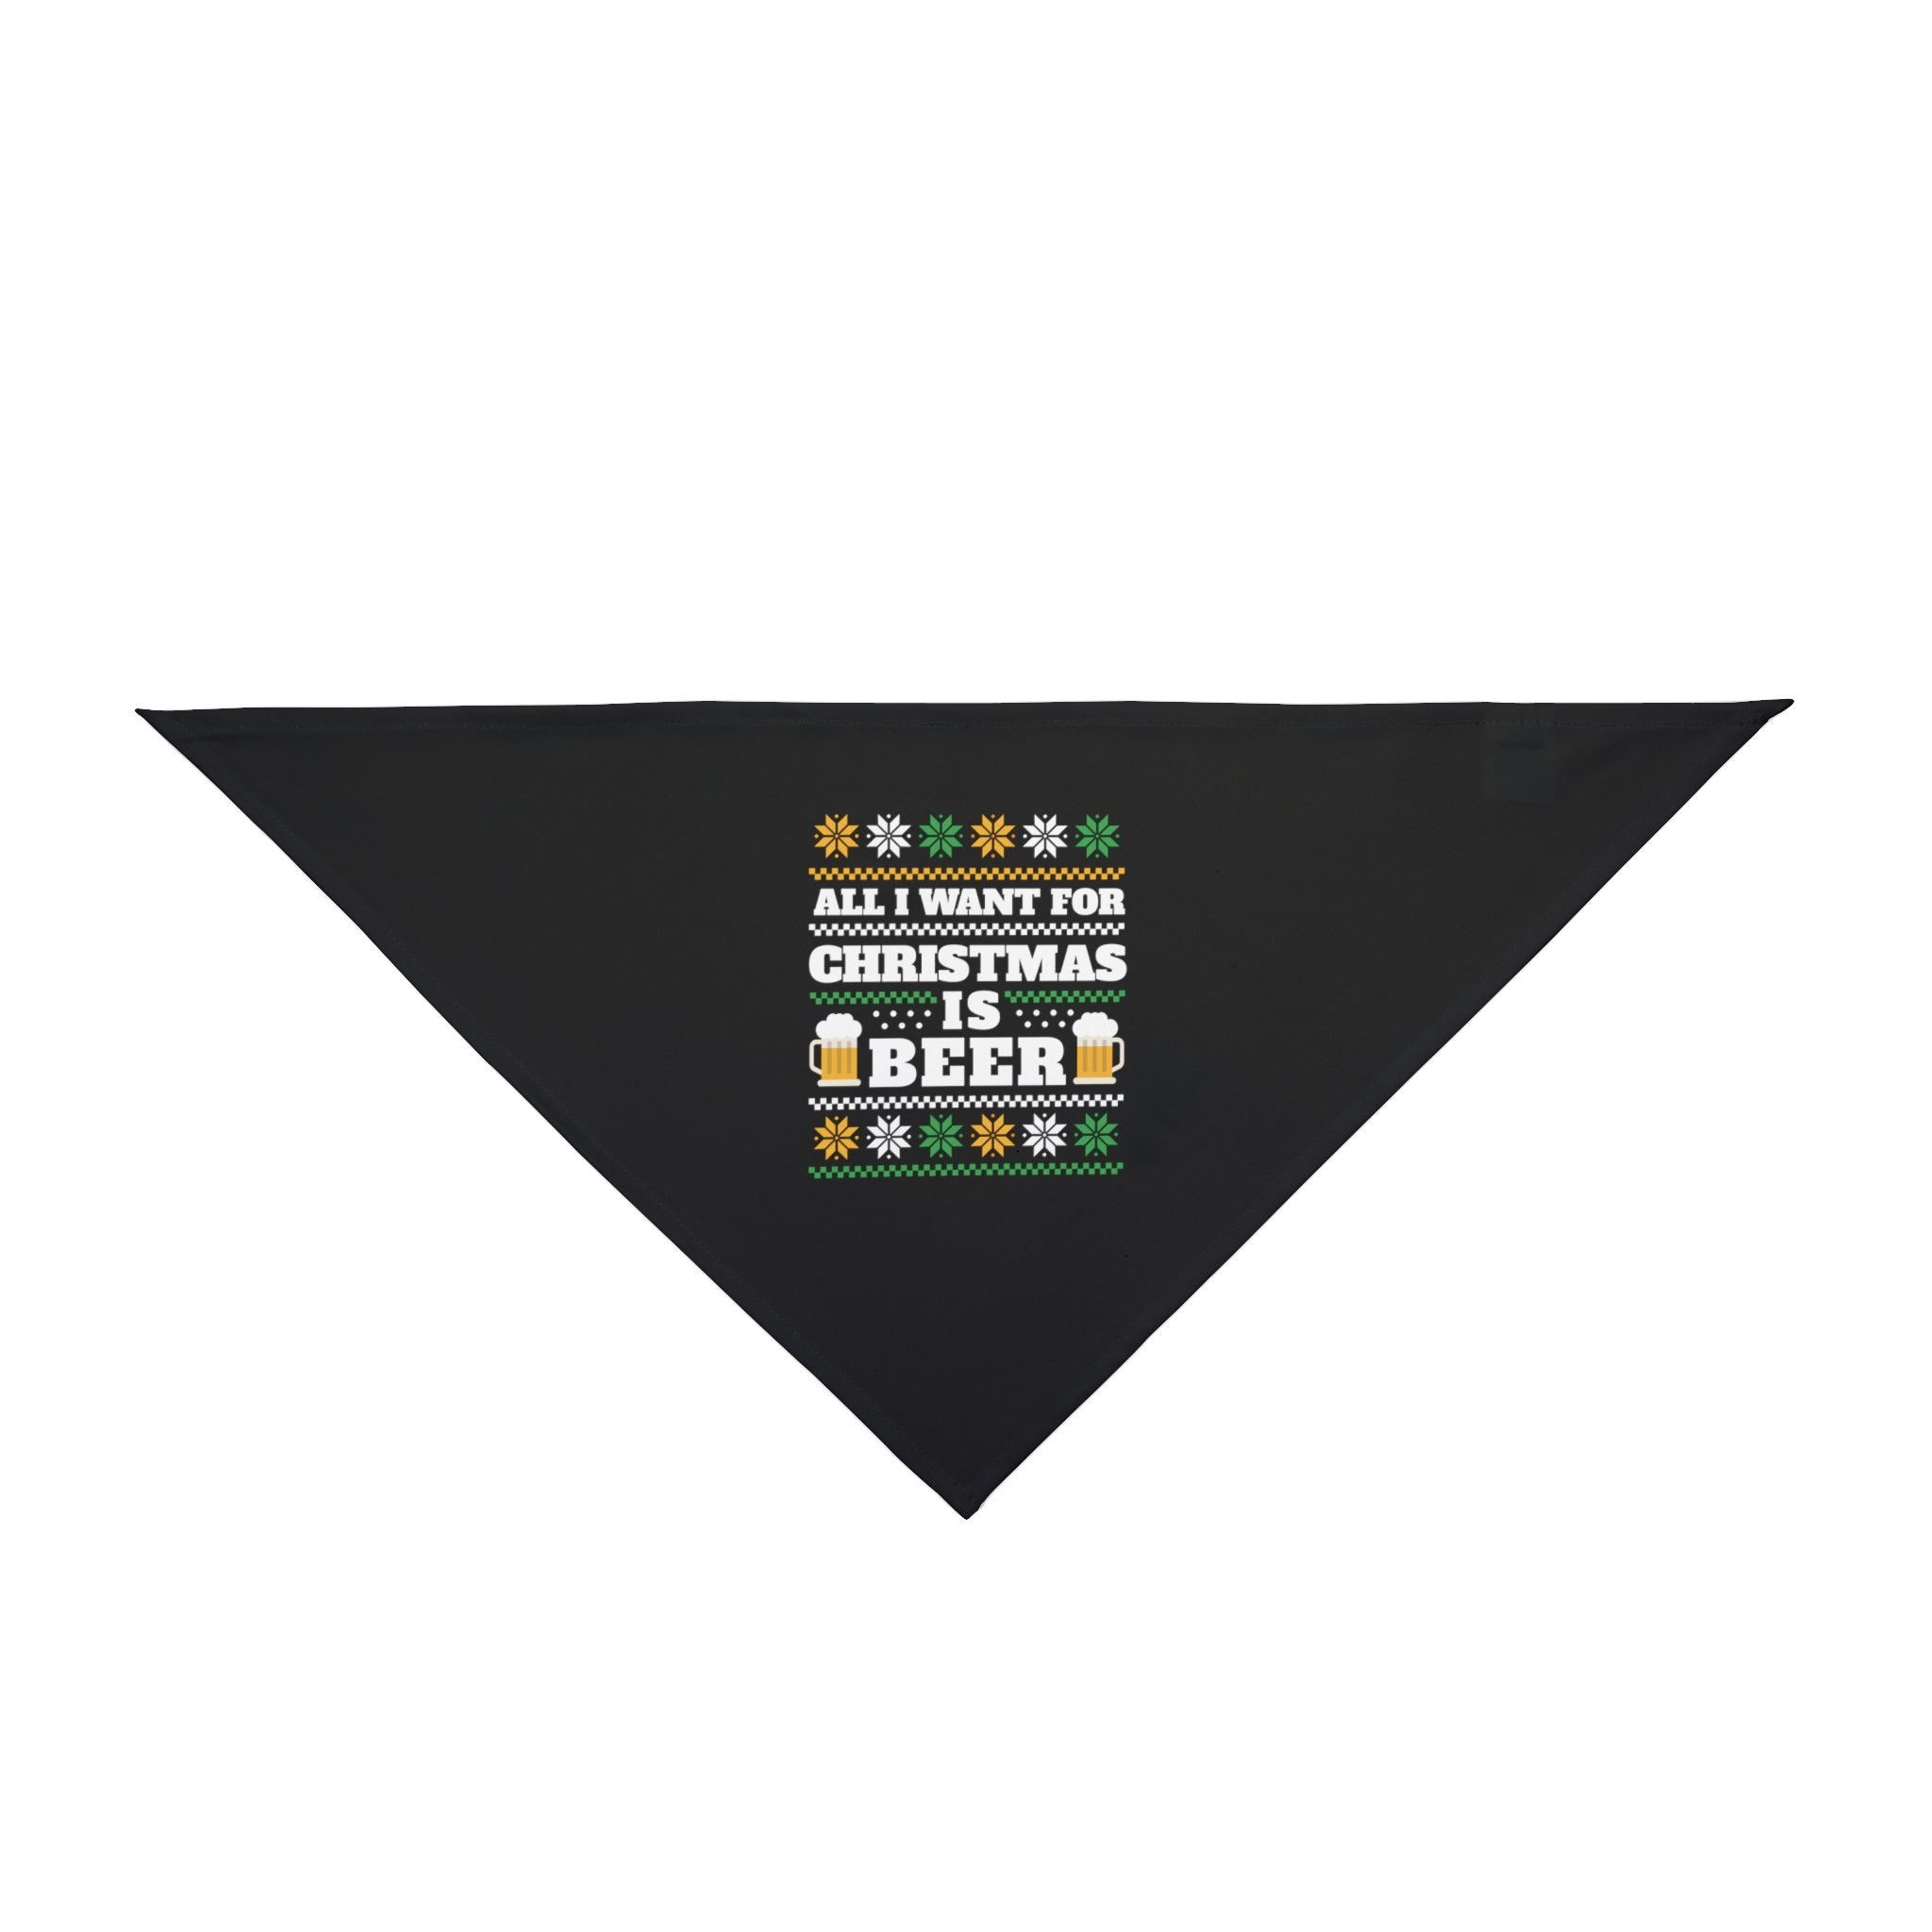 Black triangular pet bandana with a festive text design that reads "All I want for Christmas is Beer," accompanied by icons of beer mugs and snowflakes, made from durable polyester. This is the Beer Ugly Sweater - Pet Bandana.